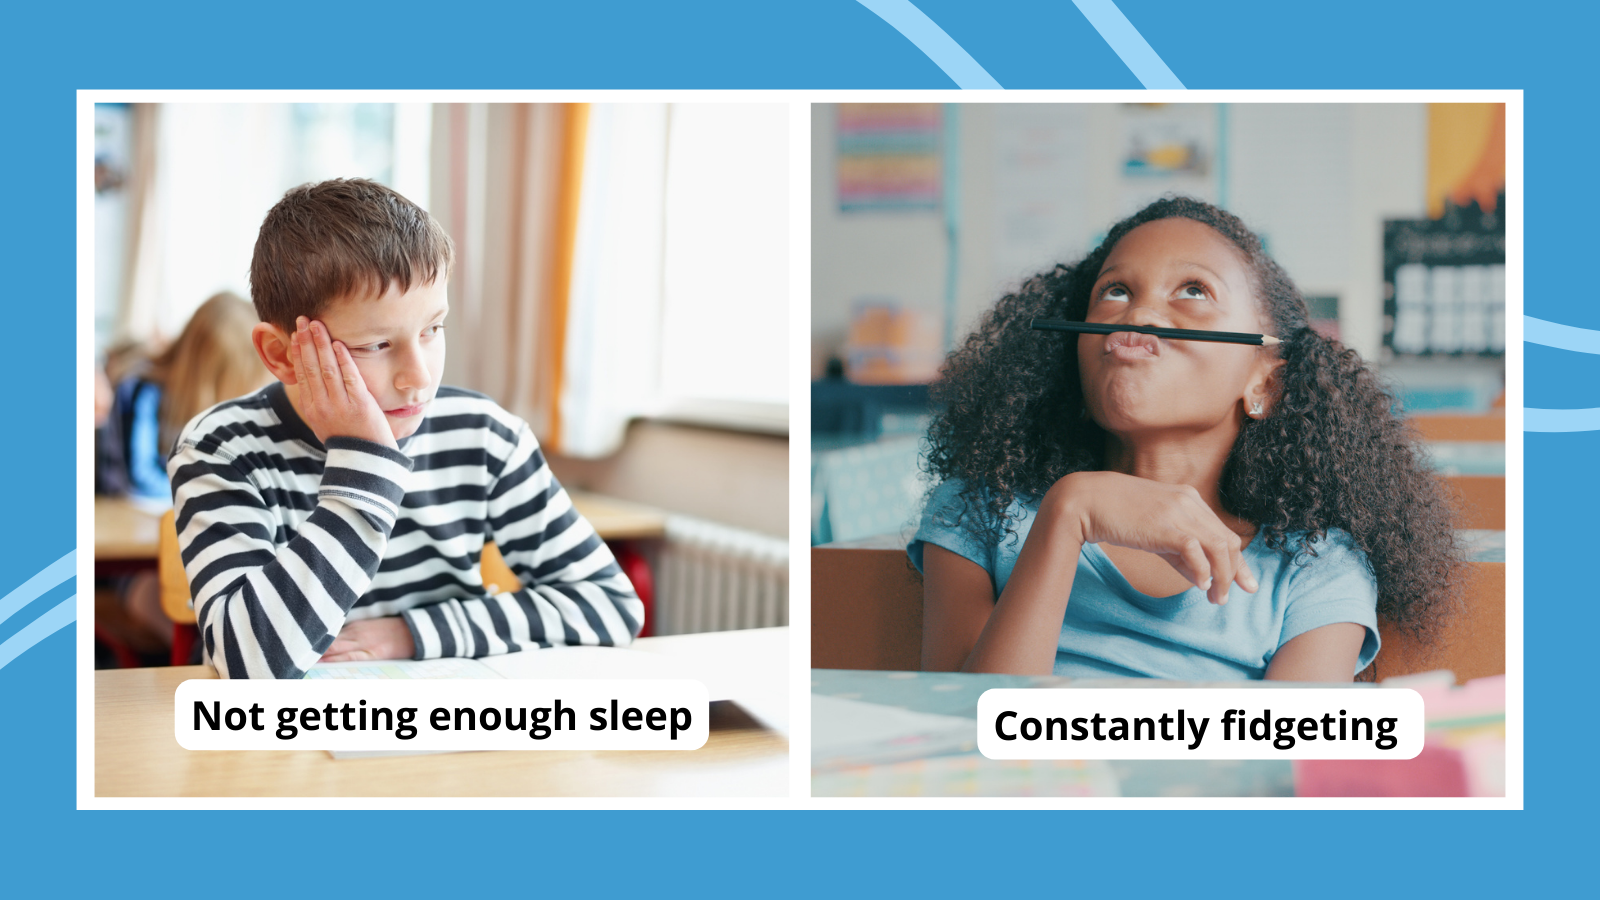 Examples of signs of ADHD including student who isn't getting enough sleep looking tired at his desk and student constantly fidgeting holding a pencil under her nose while at her desk.